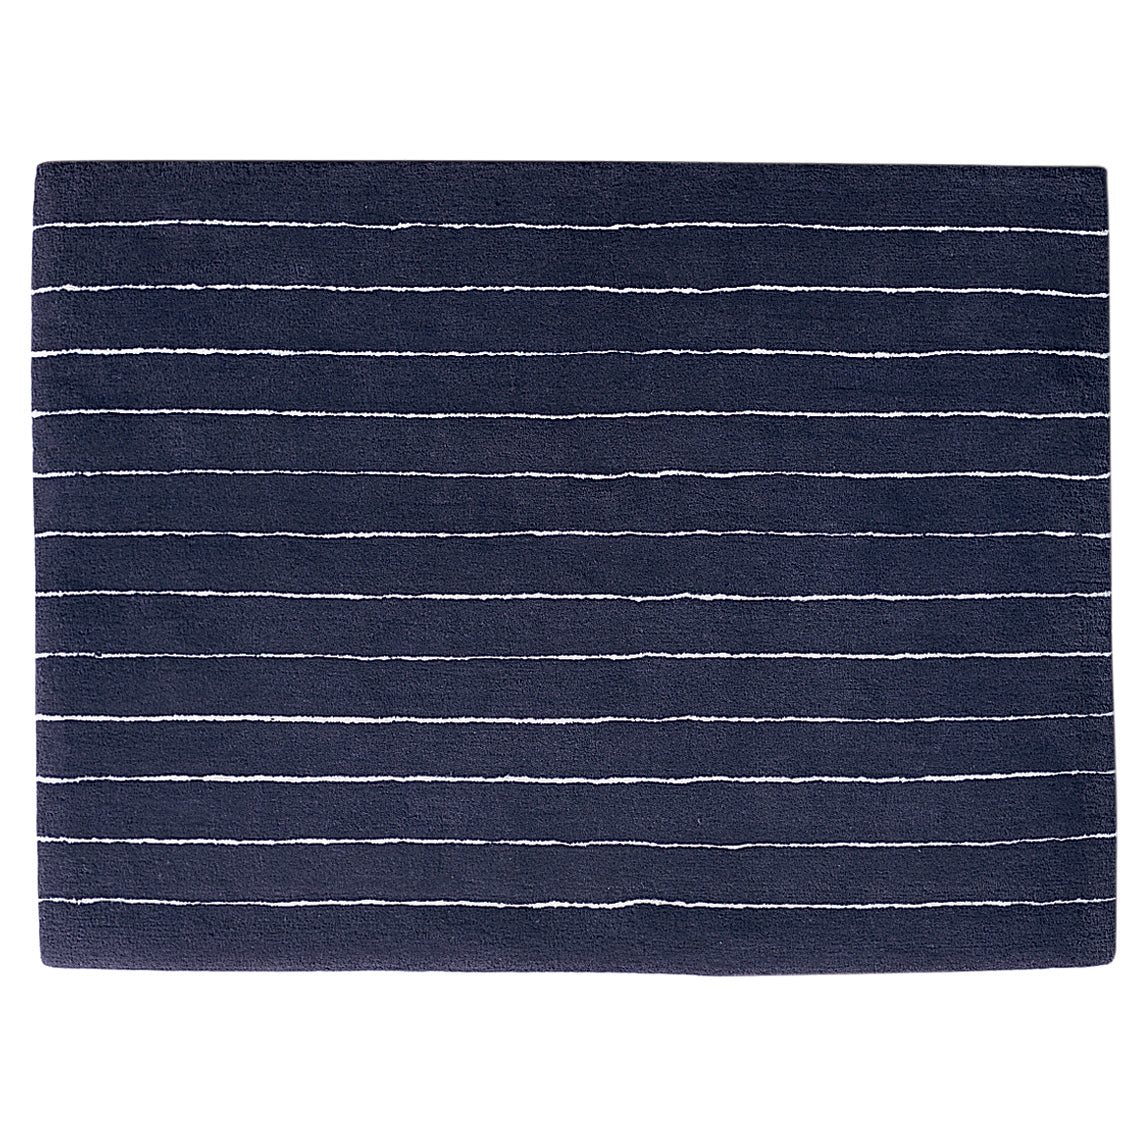 Cool Hand Tufted Rug: 118.1